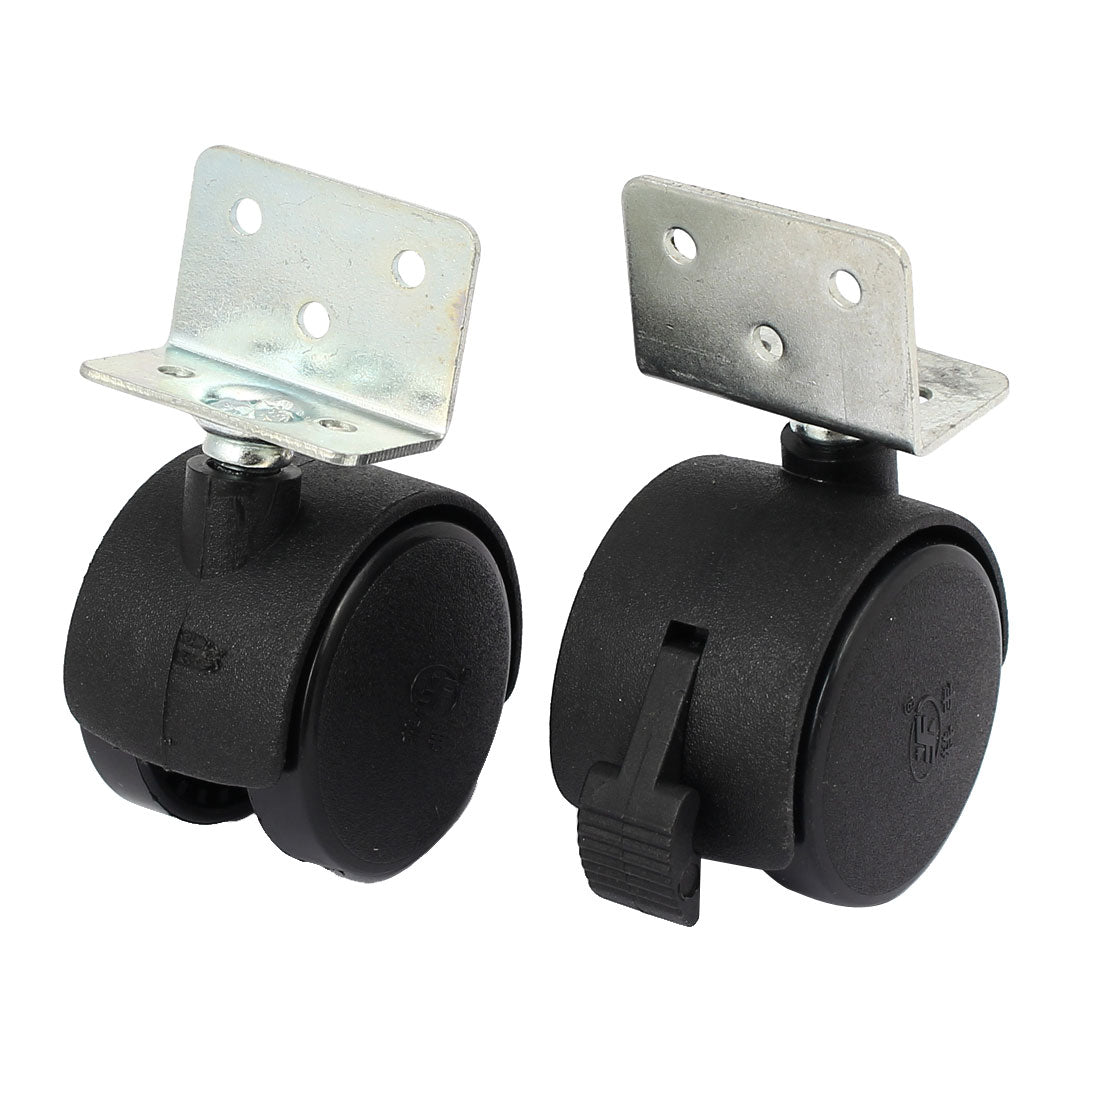 uxcell Uxcell 38mm 1.5" Dia Wheel Top Plate Rotatable Universal Swivel Brake Caster Black 2pcs